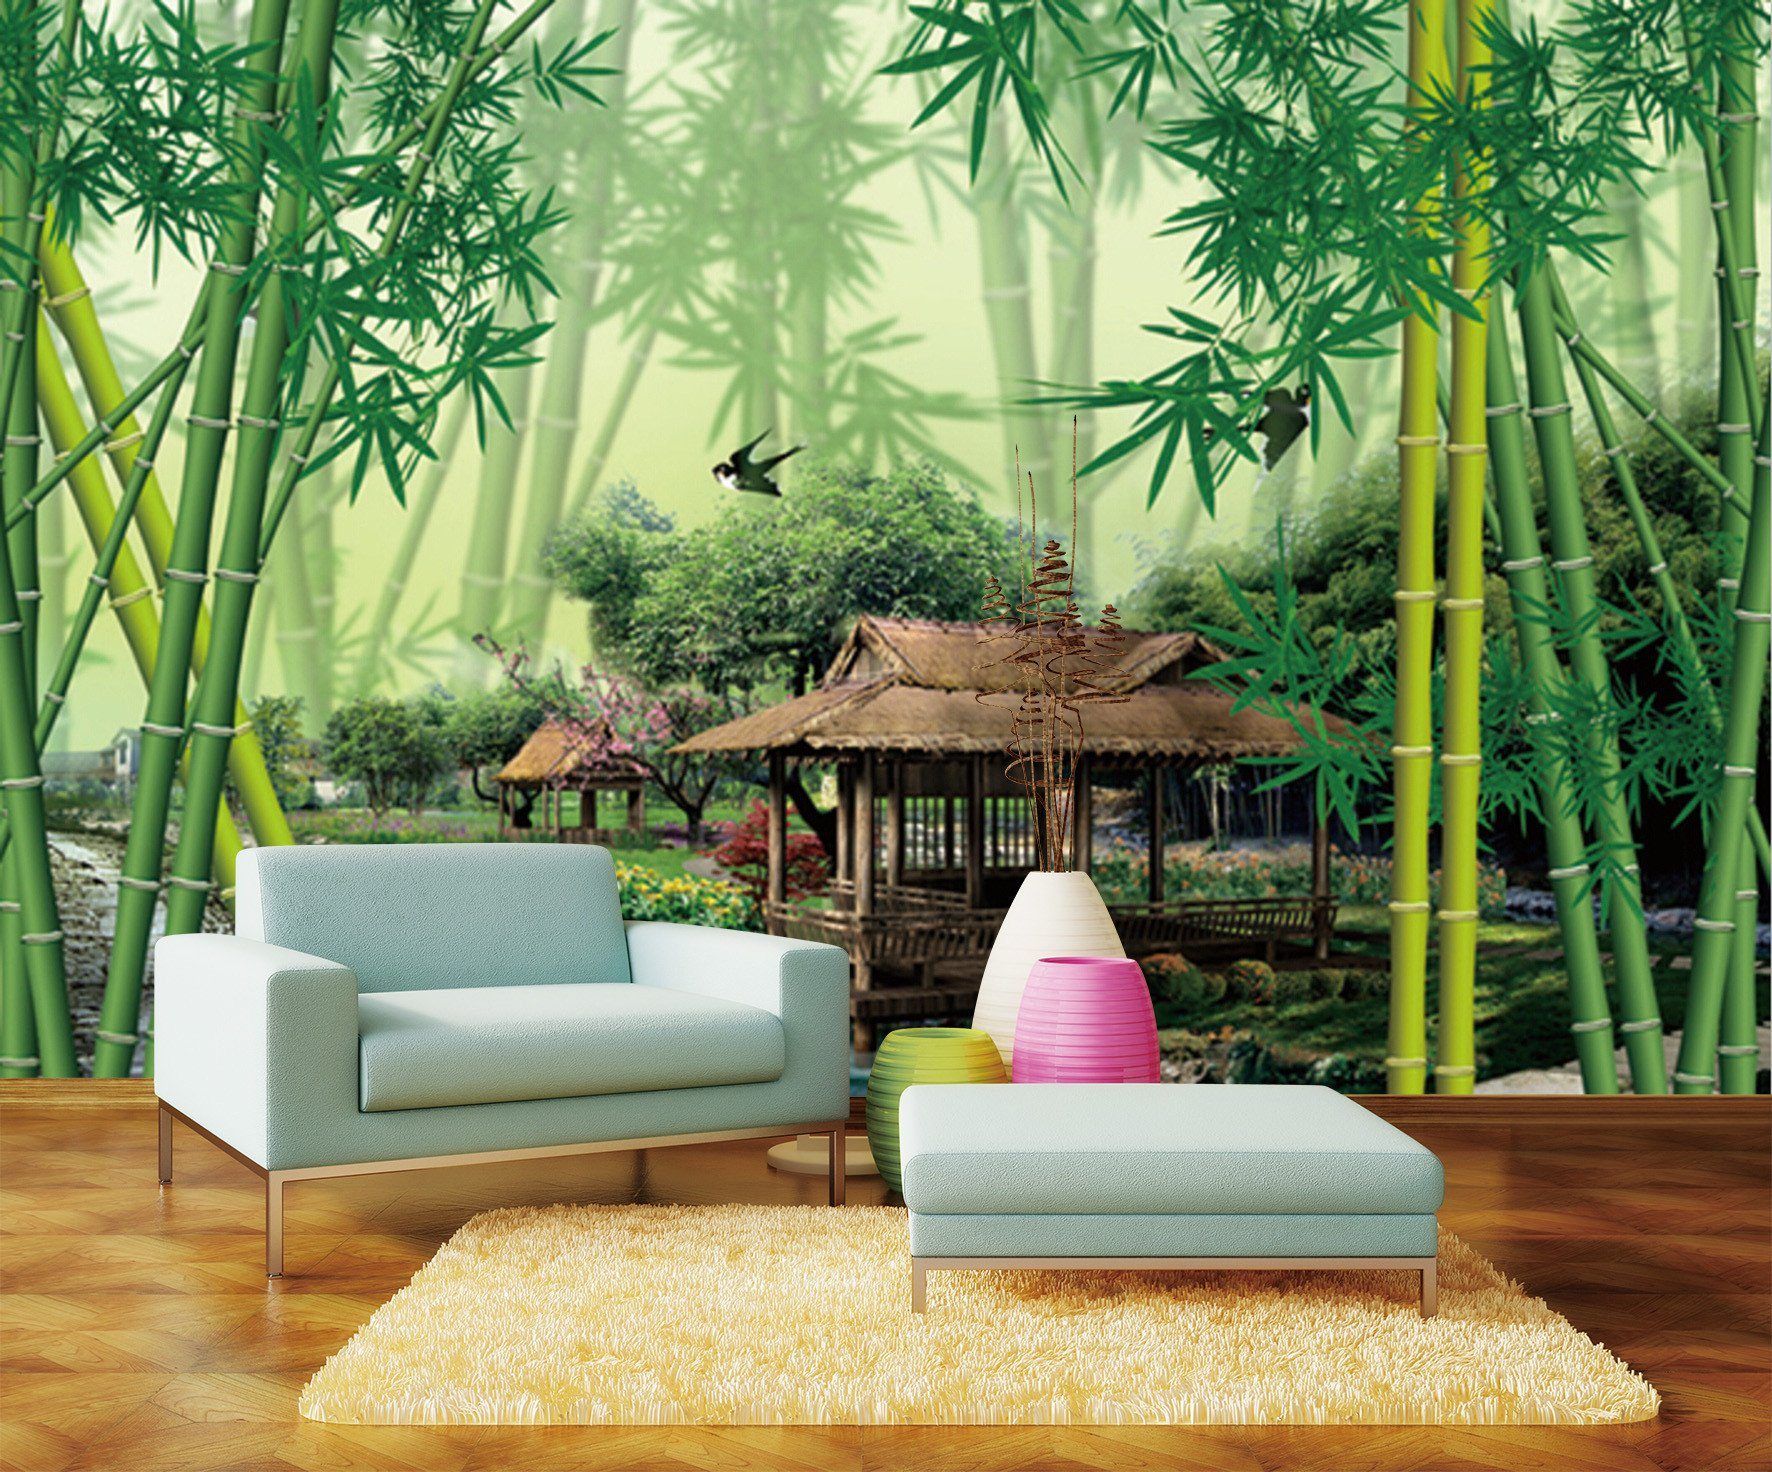 BAMBOO WALLPAPER 3D Wall Covering Peel and Stick Bamboo Art - Etsy